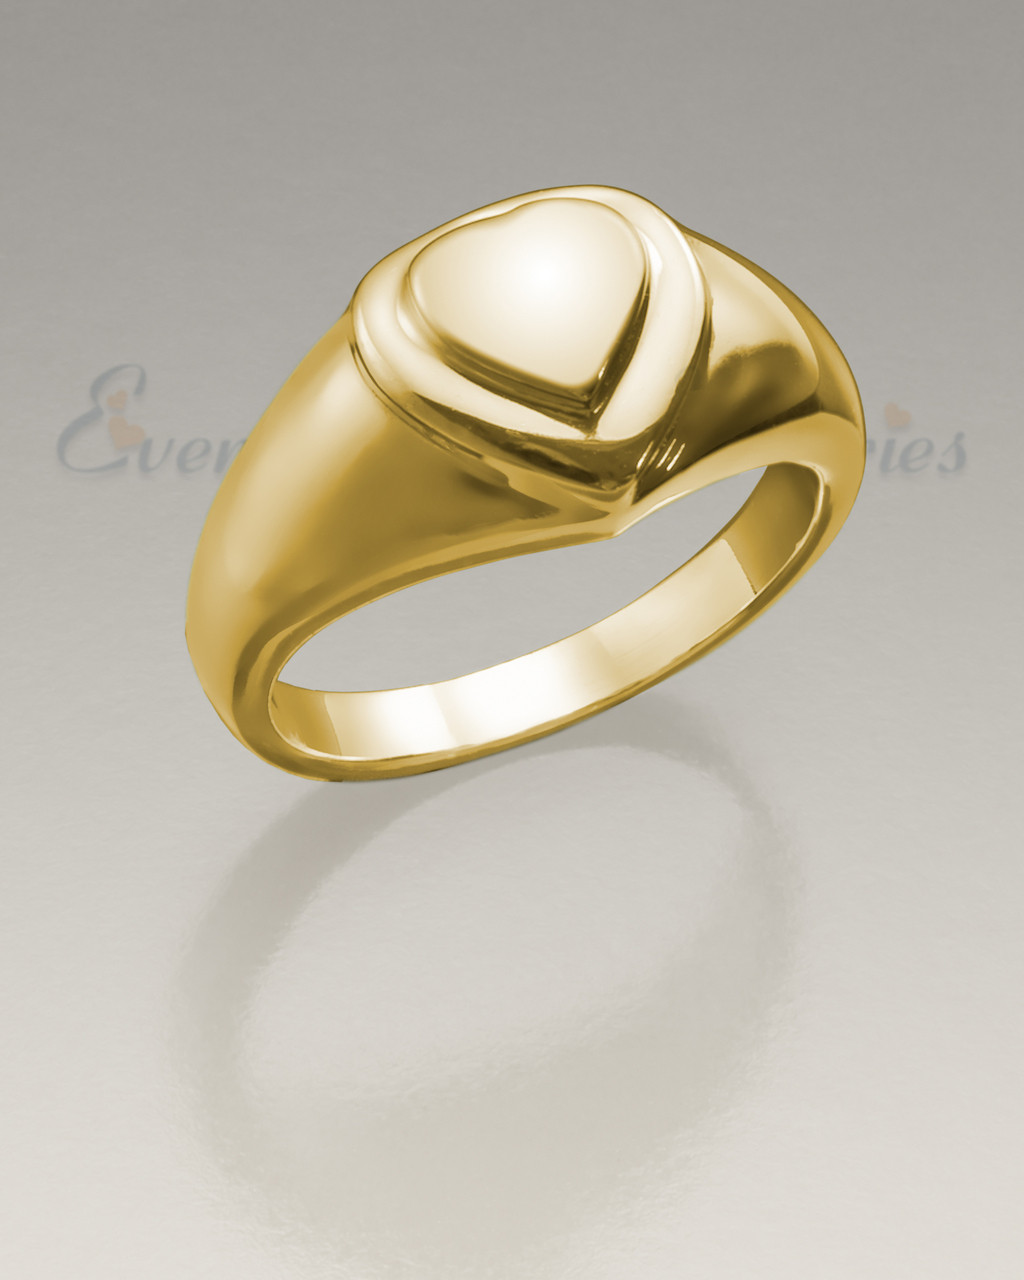 Solid 14 karat gold heart ring cremation keepsake to honor the deceased